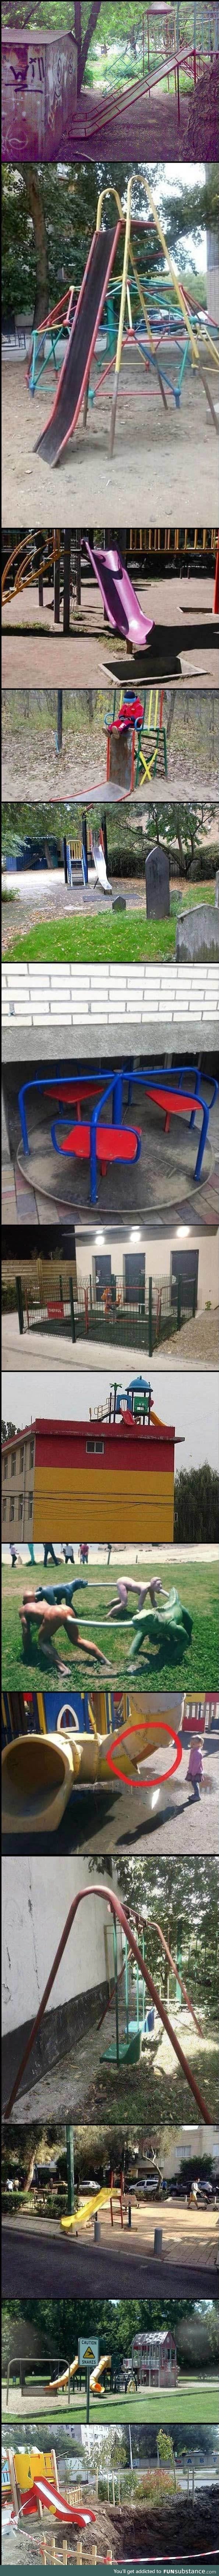 When you have to build a playground but you hate kids